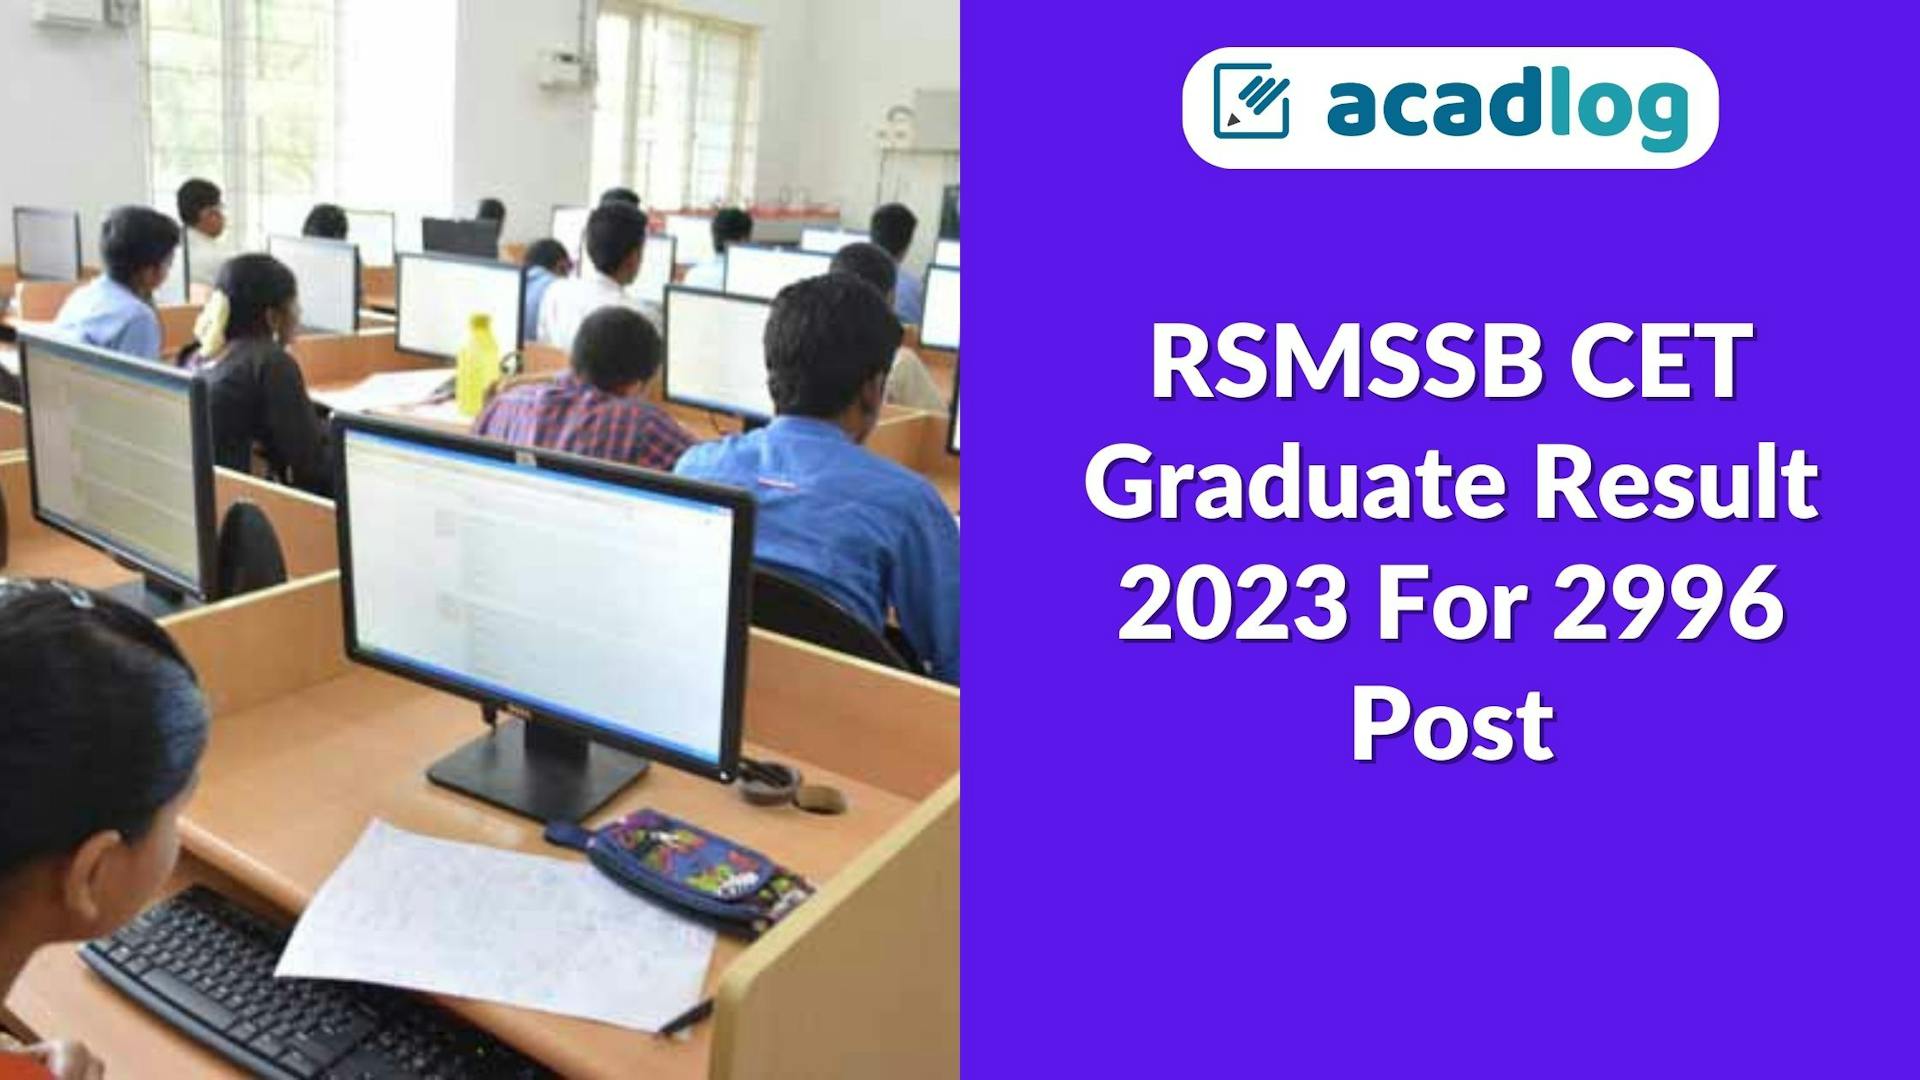 Acadlog: Rajasthan RSMSSB Common Eligibility Test CET Exam 2022 Result with Score Card 2023 2996 Post